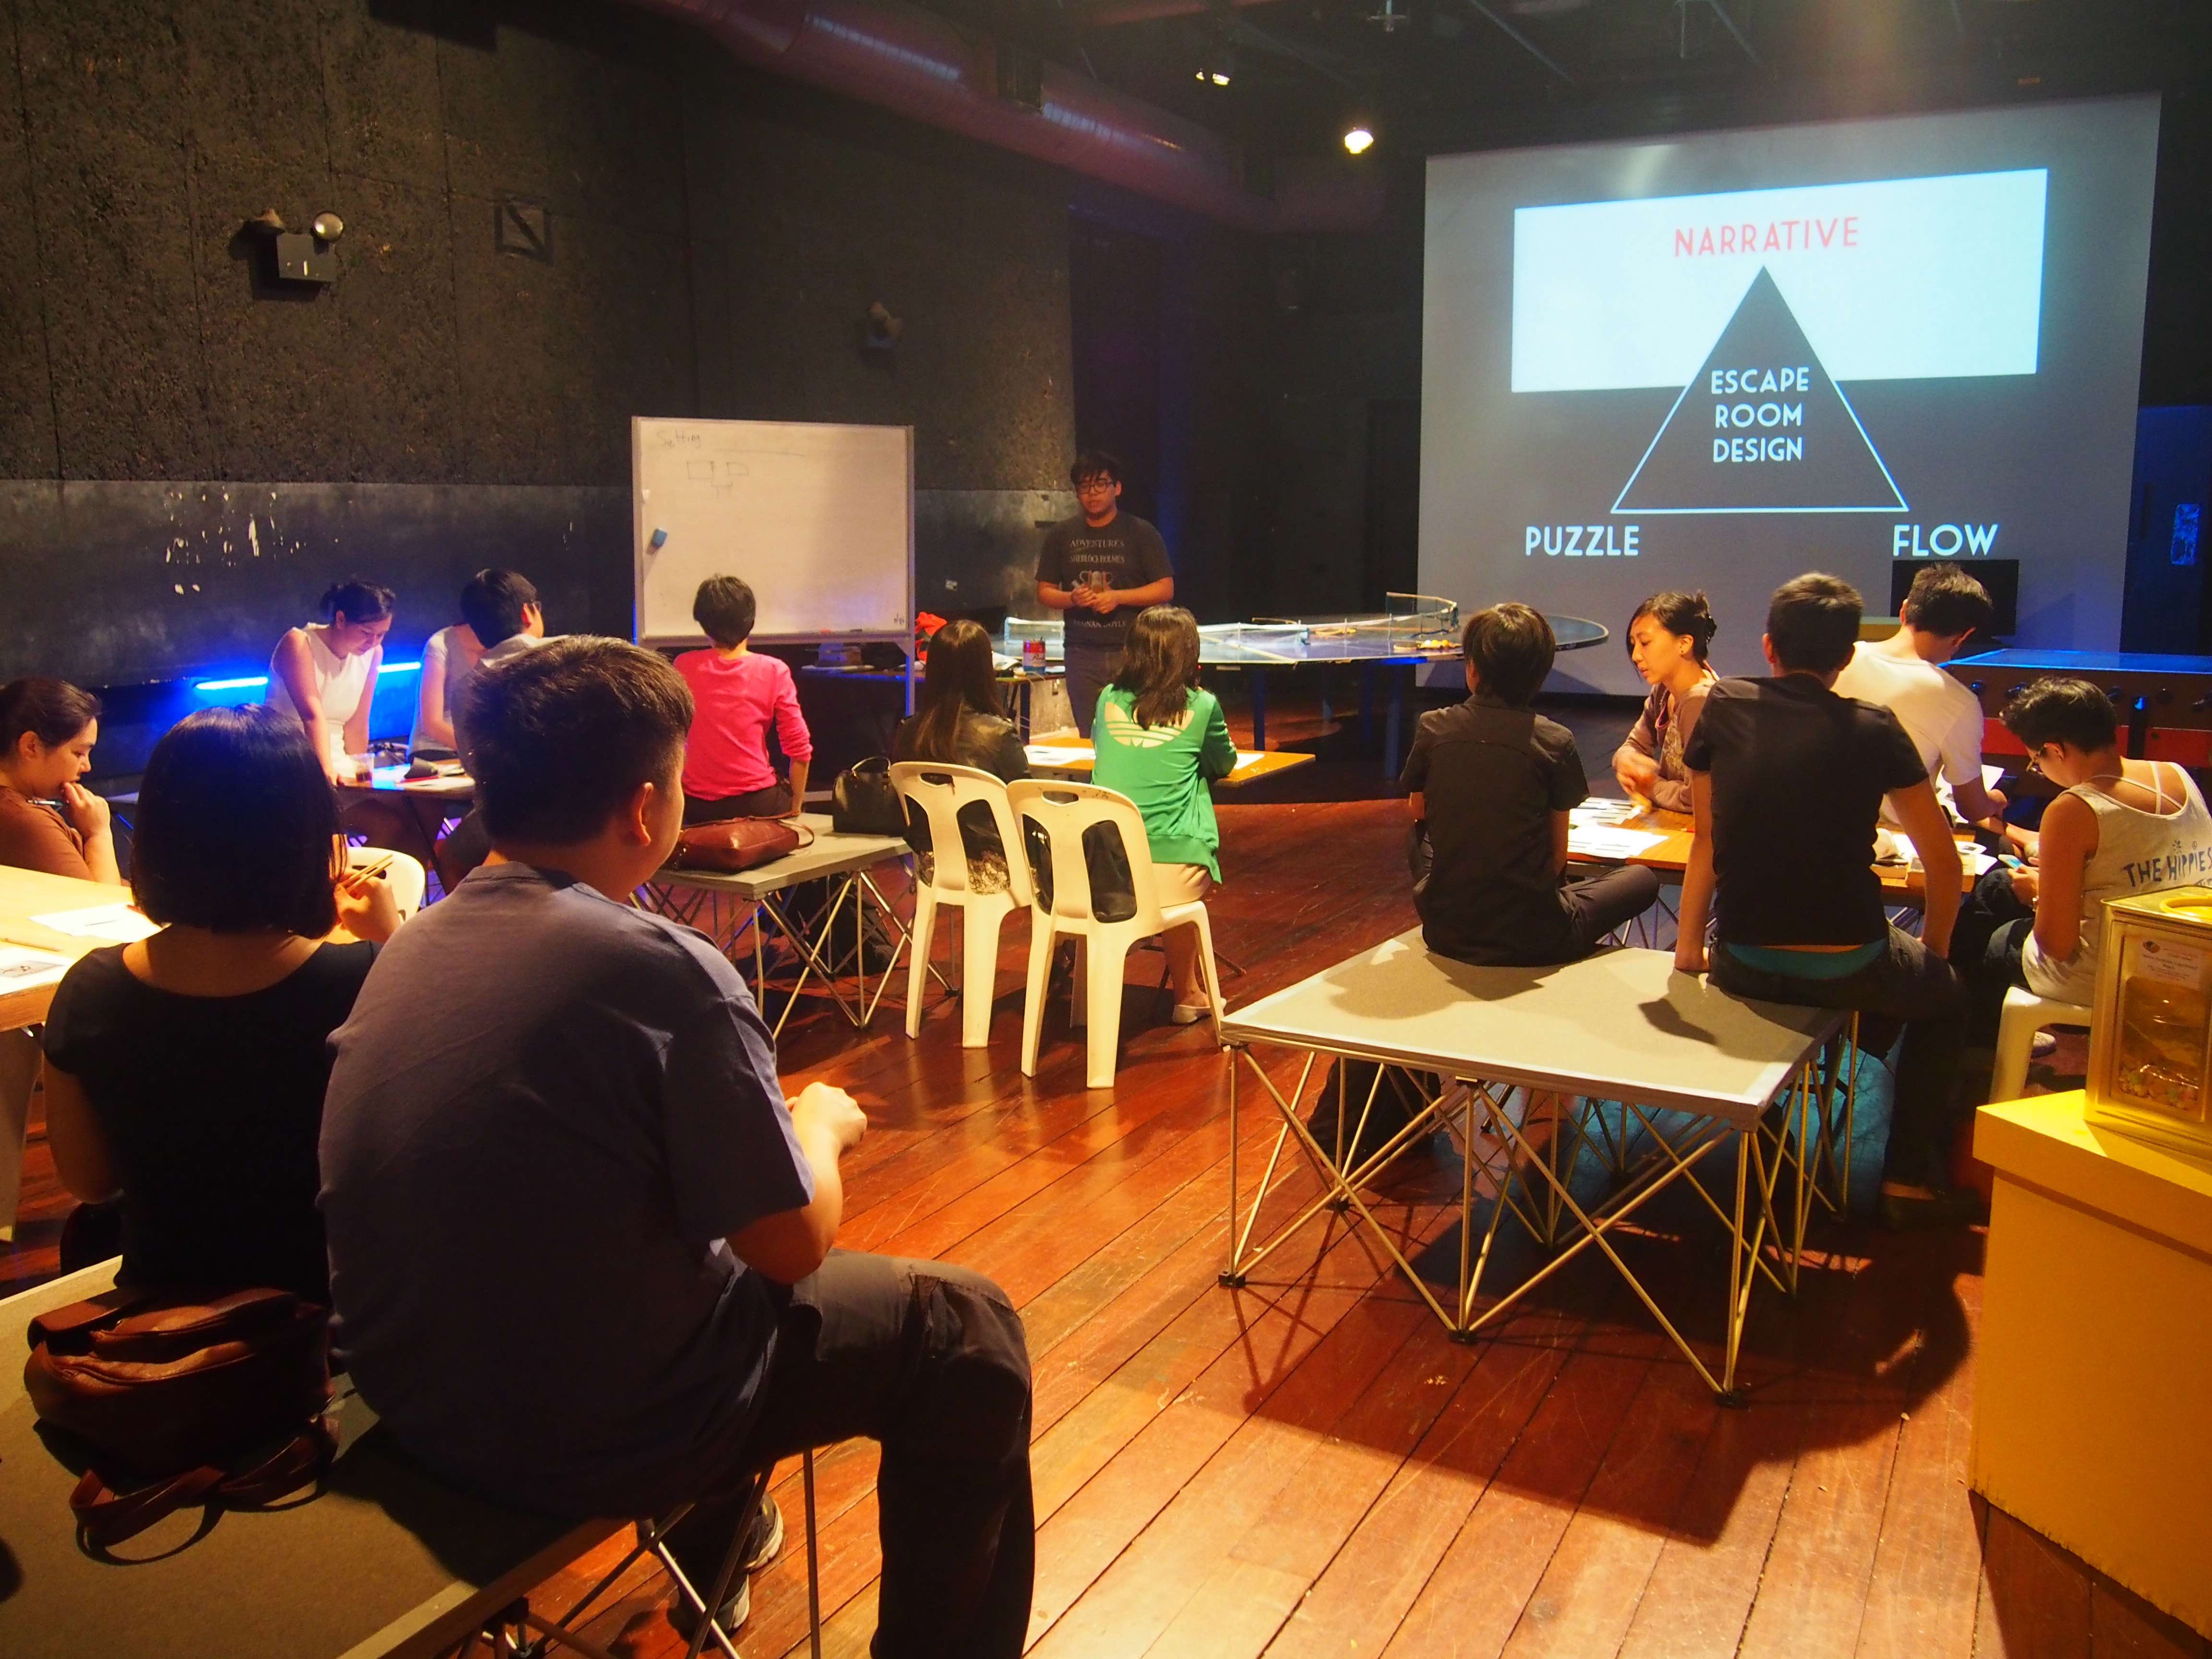 Photograph of a training venue with around ten trainees seated and one trainer who is standing. There are workshop materials such as a whiteboard and projector screen. On the projector screen is a triangular diagram labeled, escape room design, narrative, puzzle, flow.